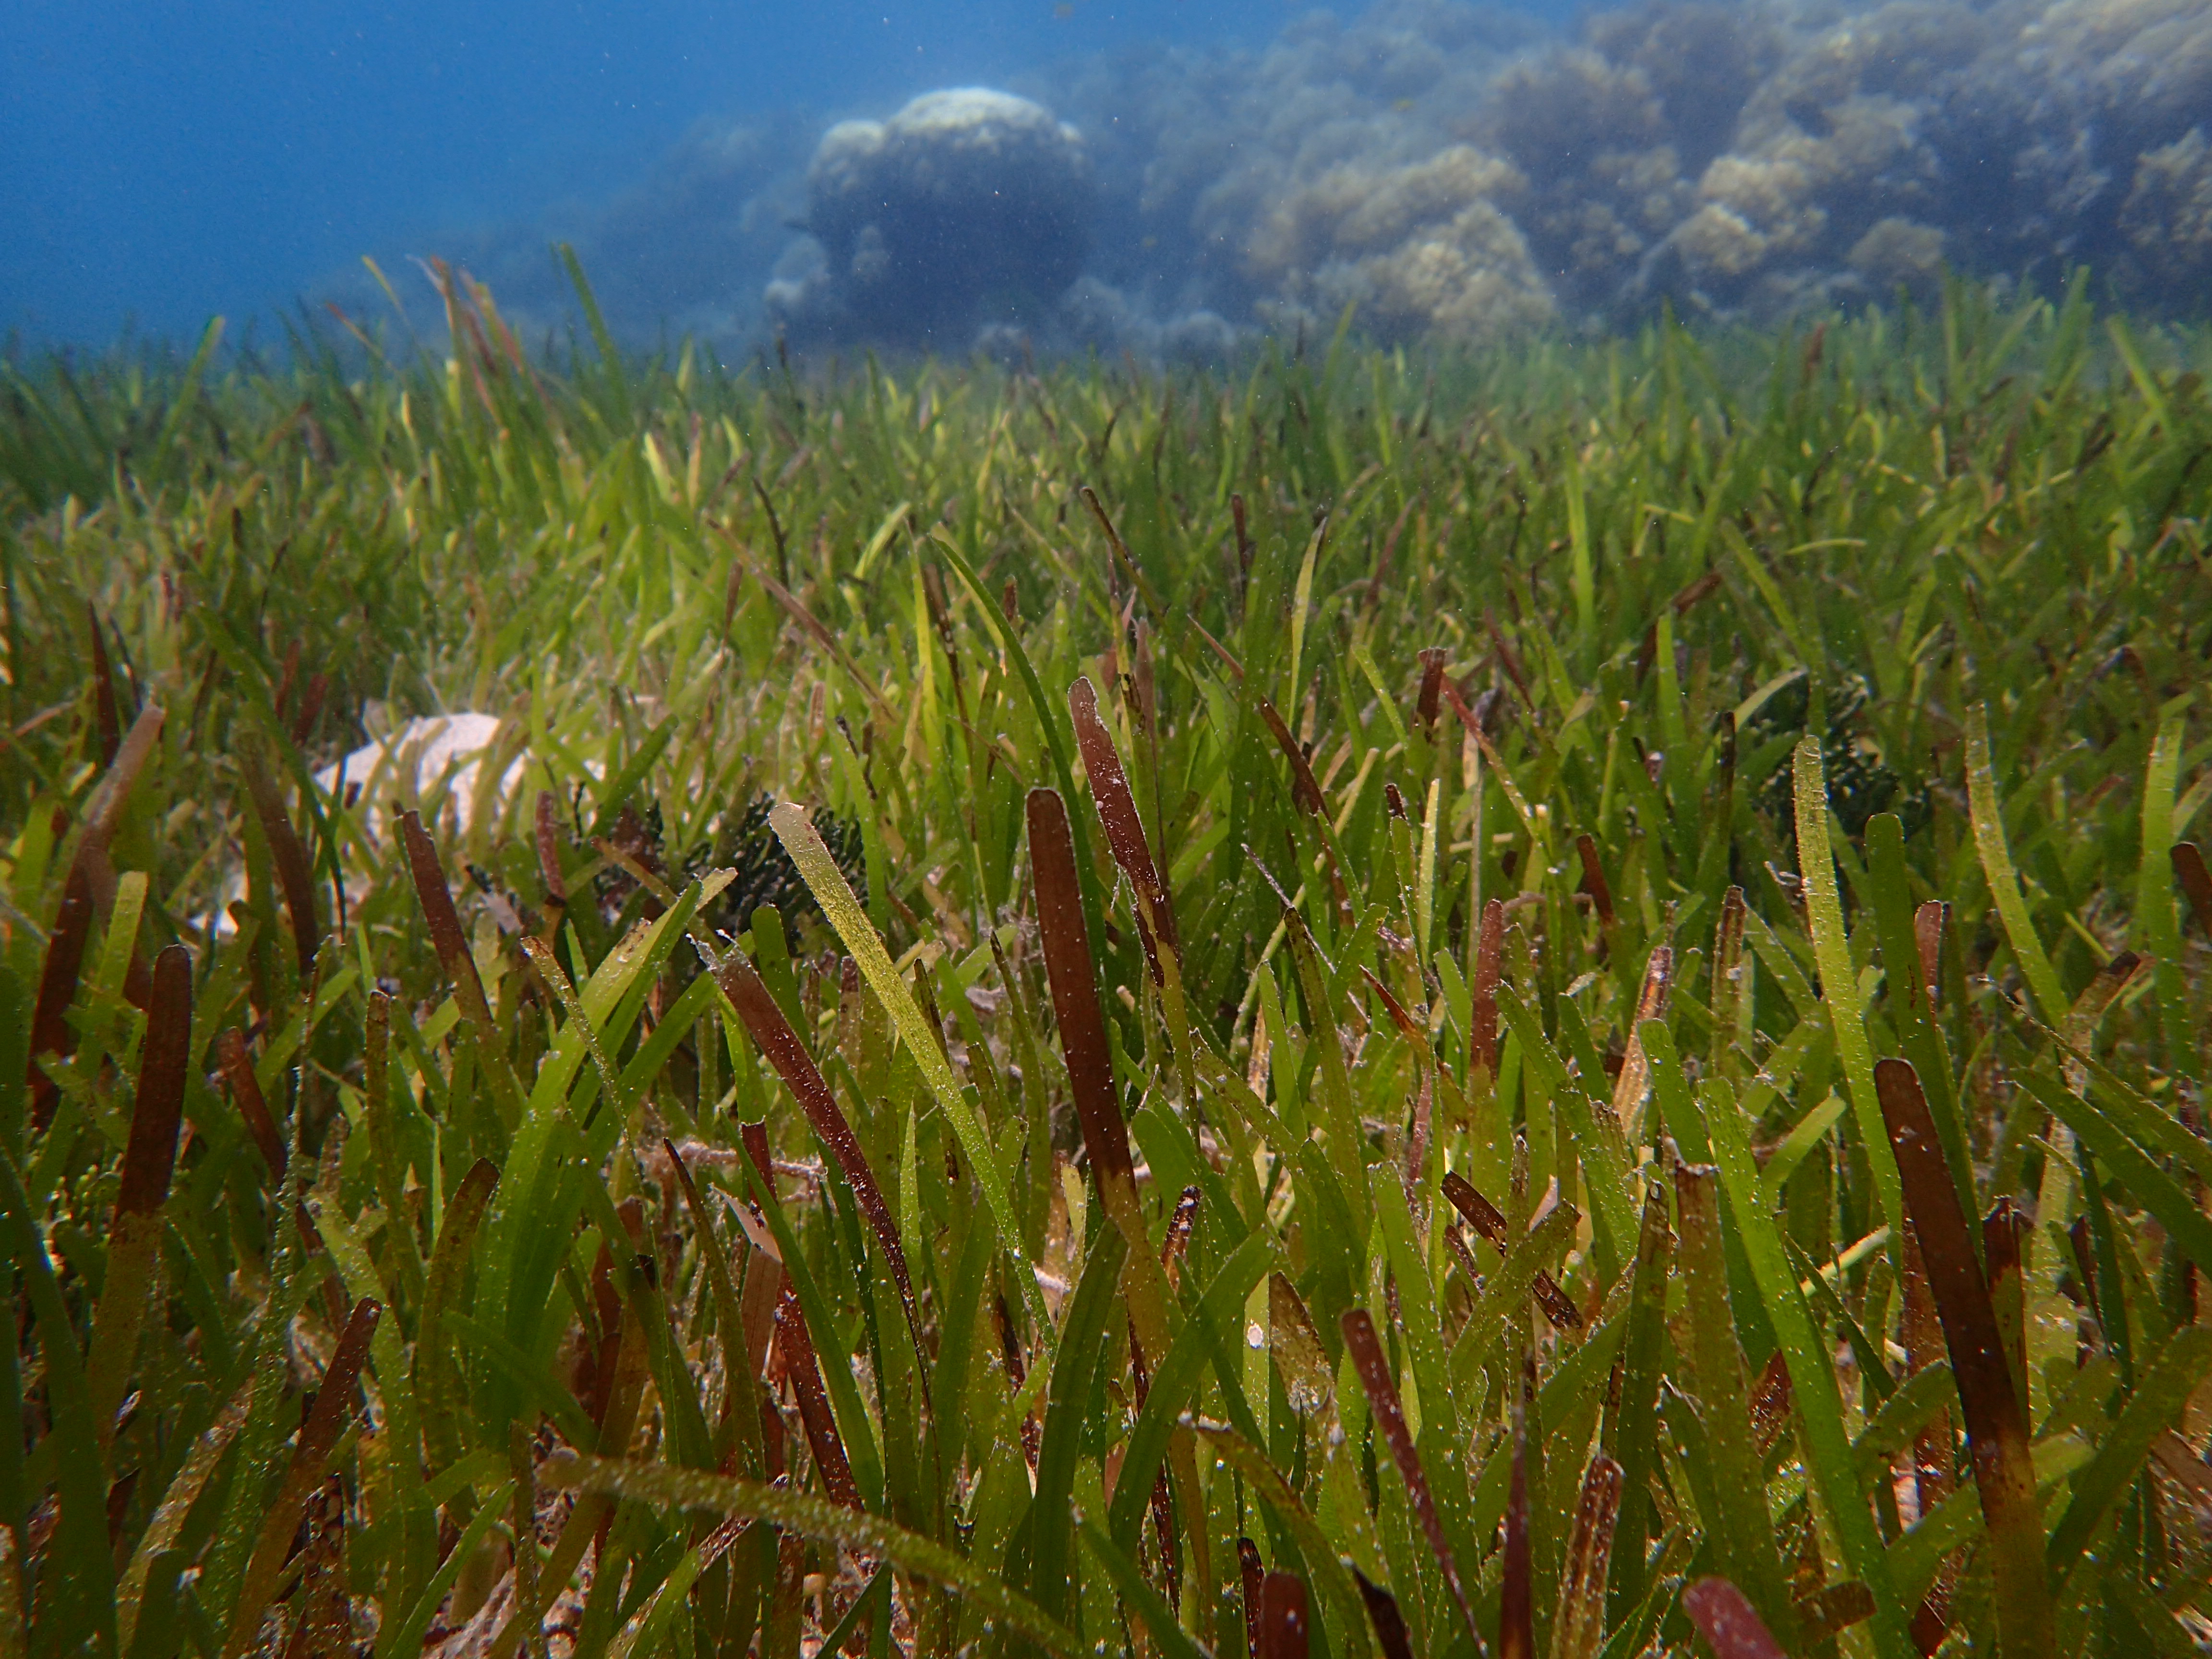 Seagrass meadow. Photo by TropWATER Seagrass Ecology Group